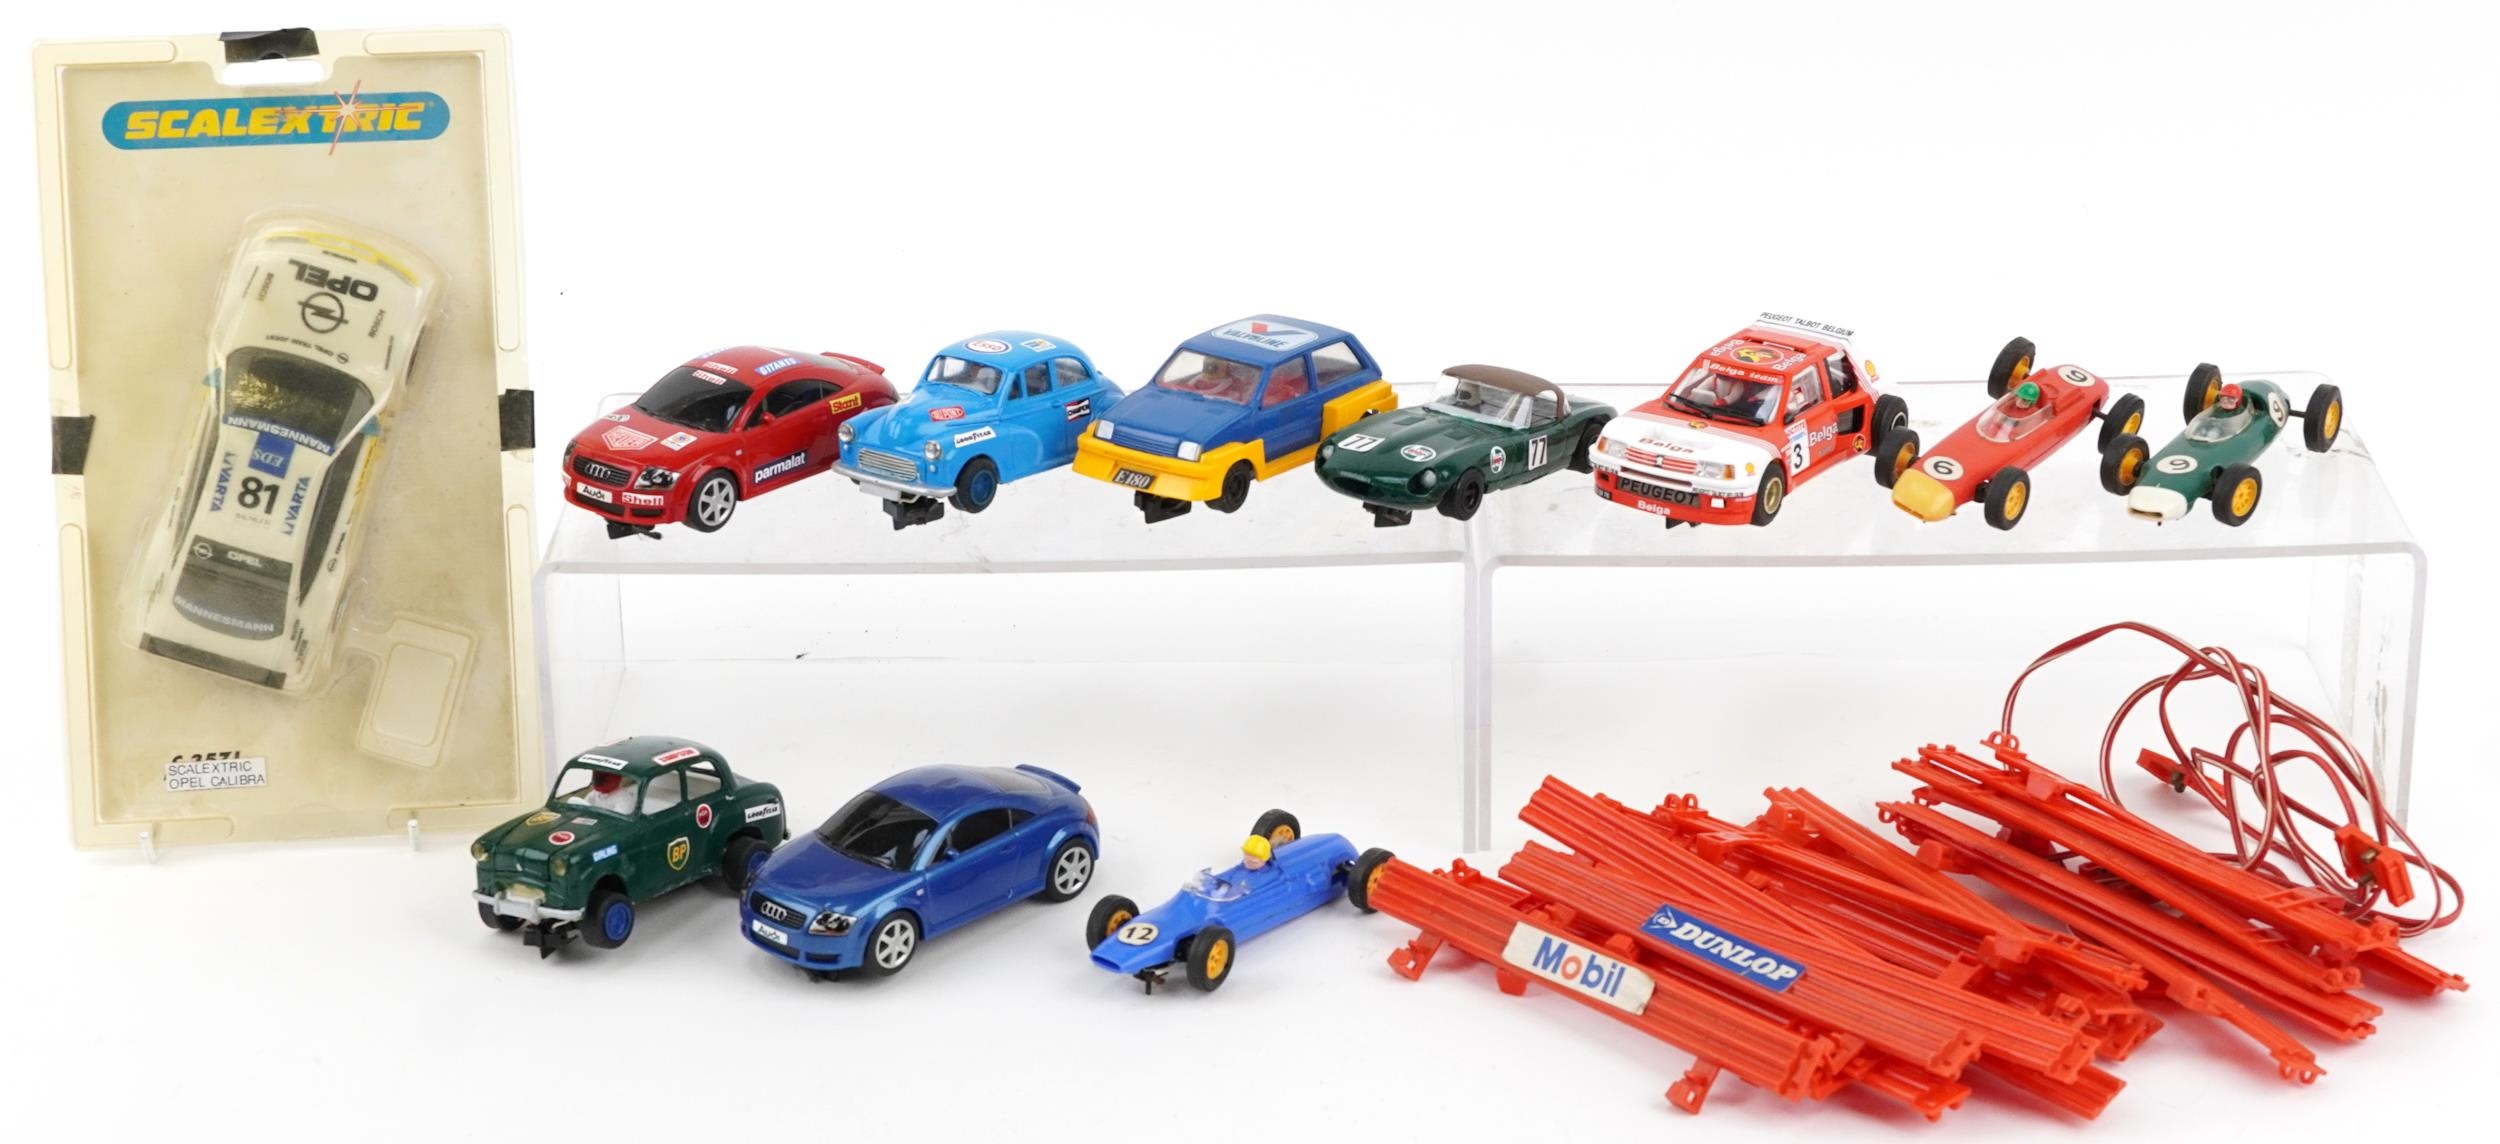 Eleven vintage and later slot cars and accessories including Scalextric and Hornby